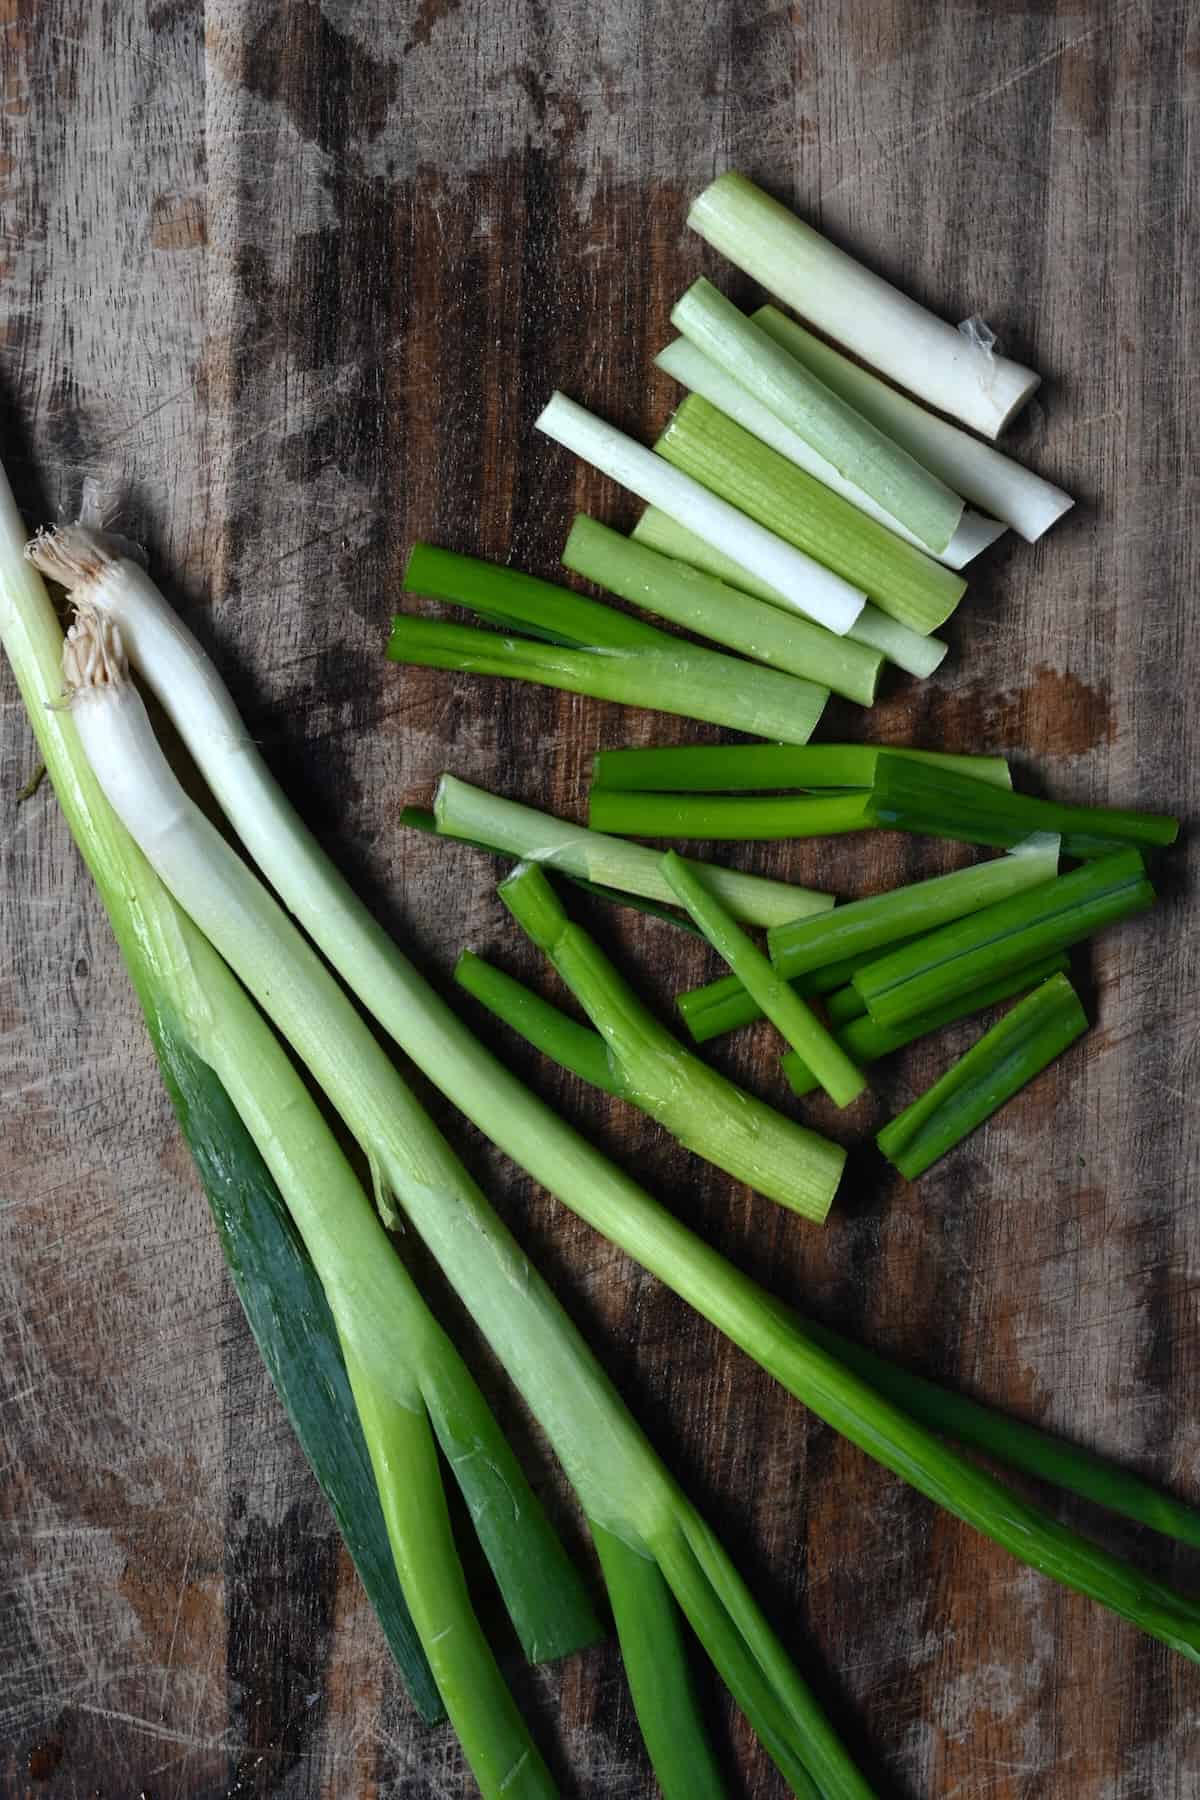 Green onions cut into small pieces